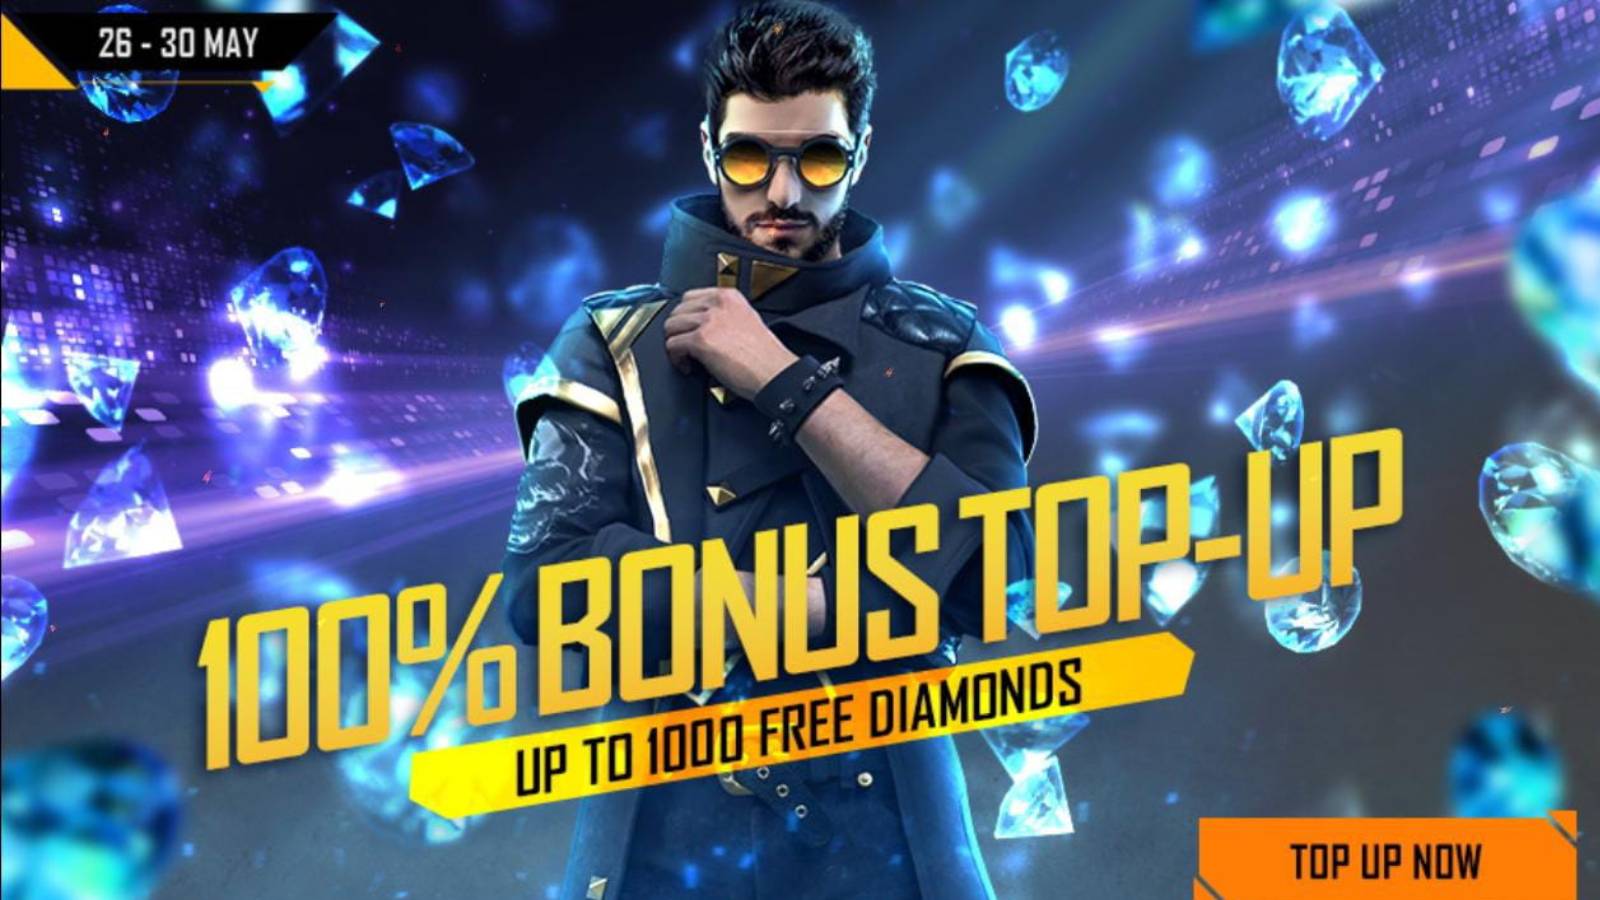 Free Fire 100% Bonus top-up event: Get up to 1000 free diamonds in Free Fire Max